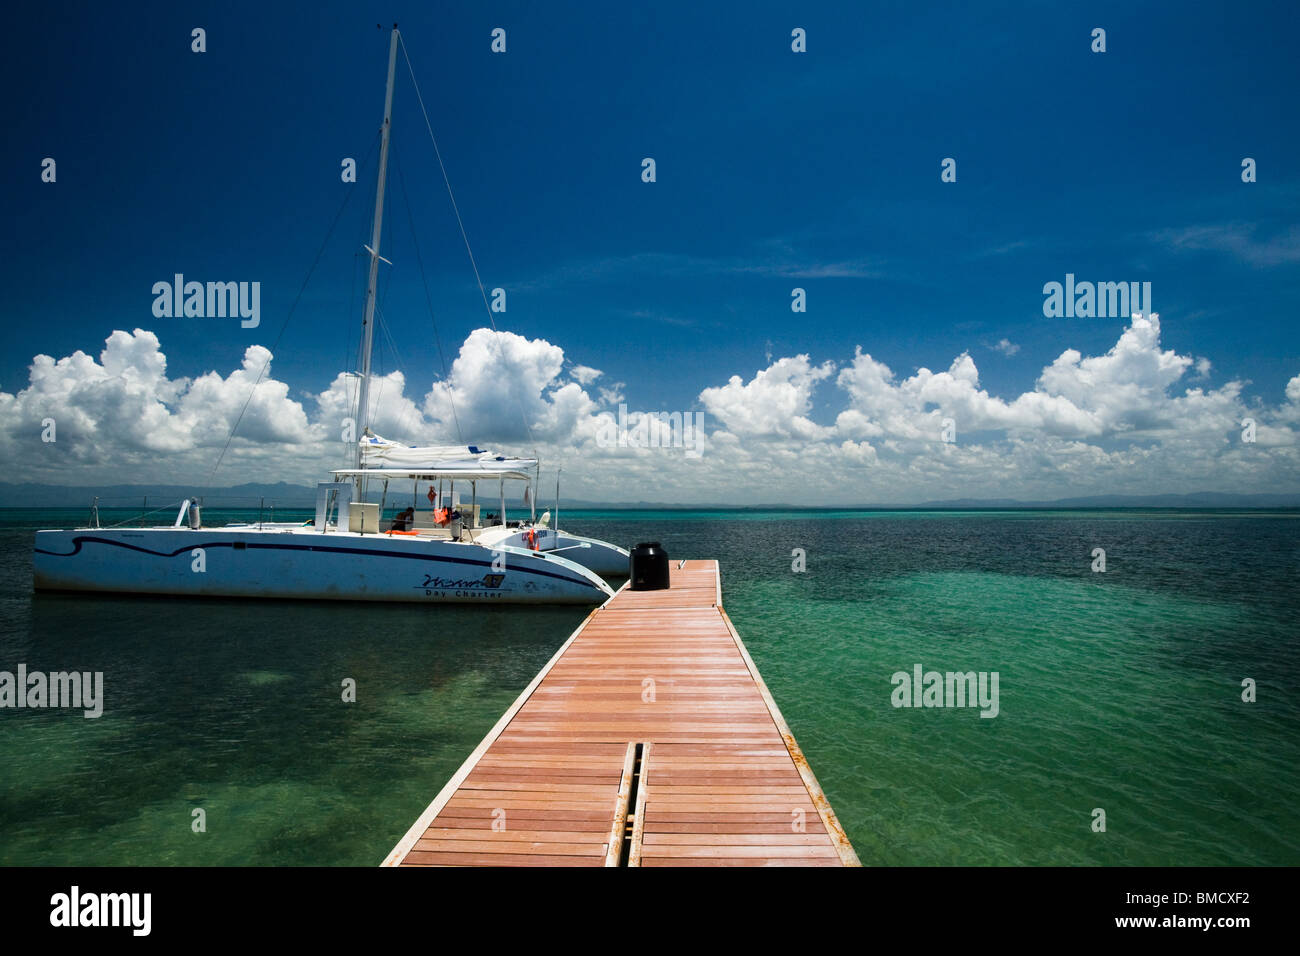 A catamaran is moored at Cayo Blanco, a small cay located off the coast of the Sancti Spiritus province, Cuba on Thursday July 3 Stock Photo